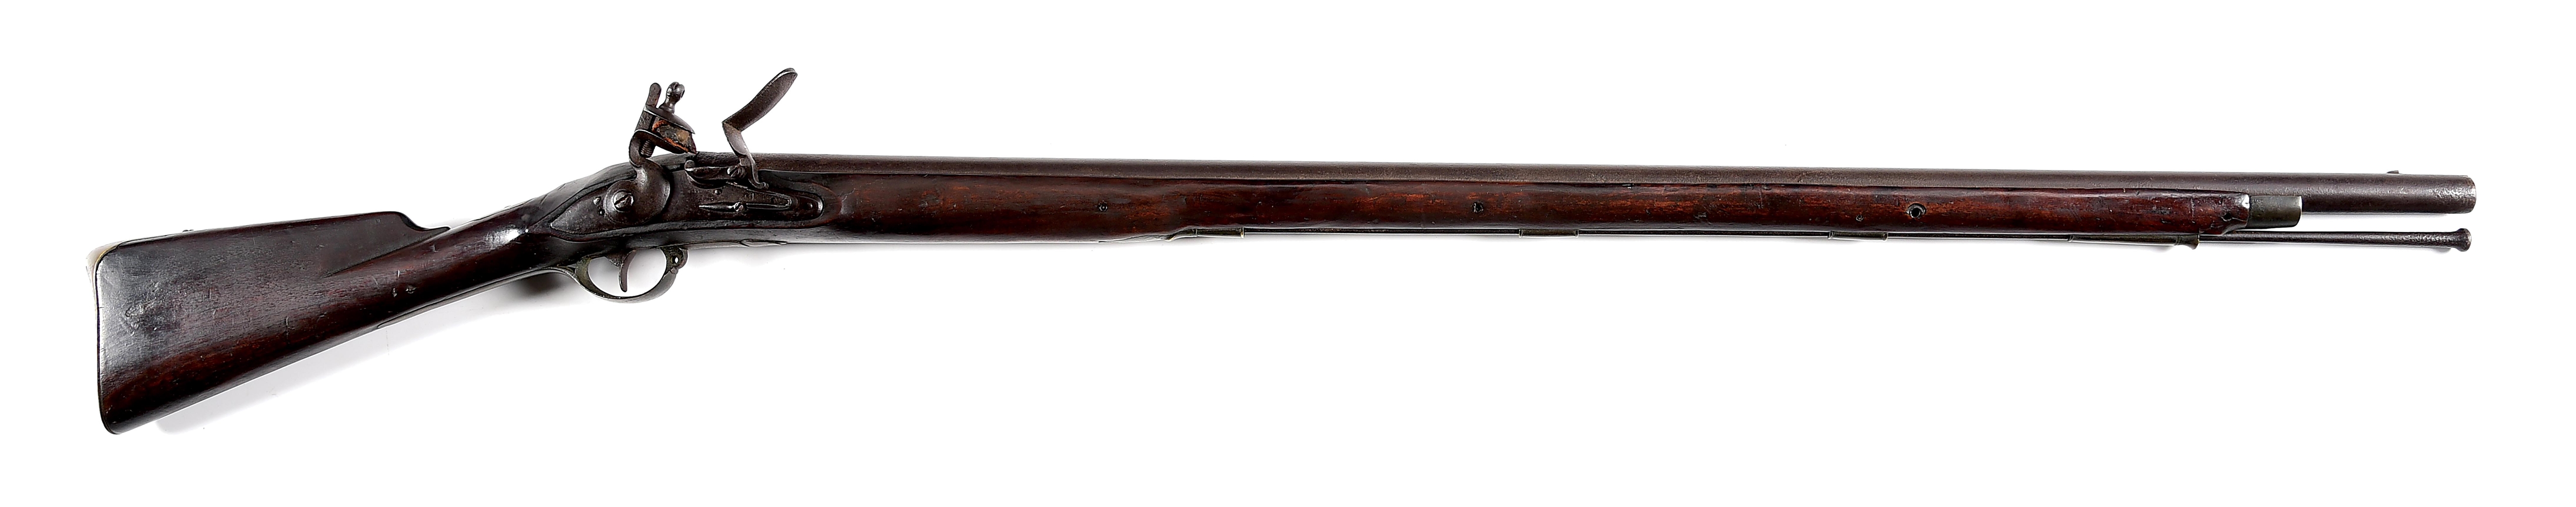 (A) MARYLAND COMMITTEE OF SAFETY STYLE MUSKET ATTRIBUTED TO PHILIP SHEETZ.